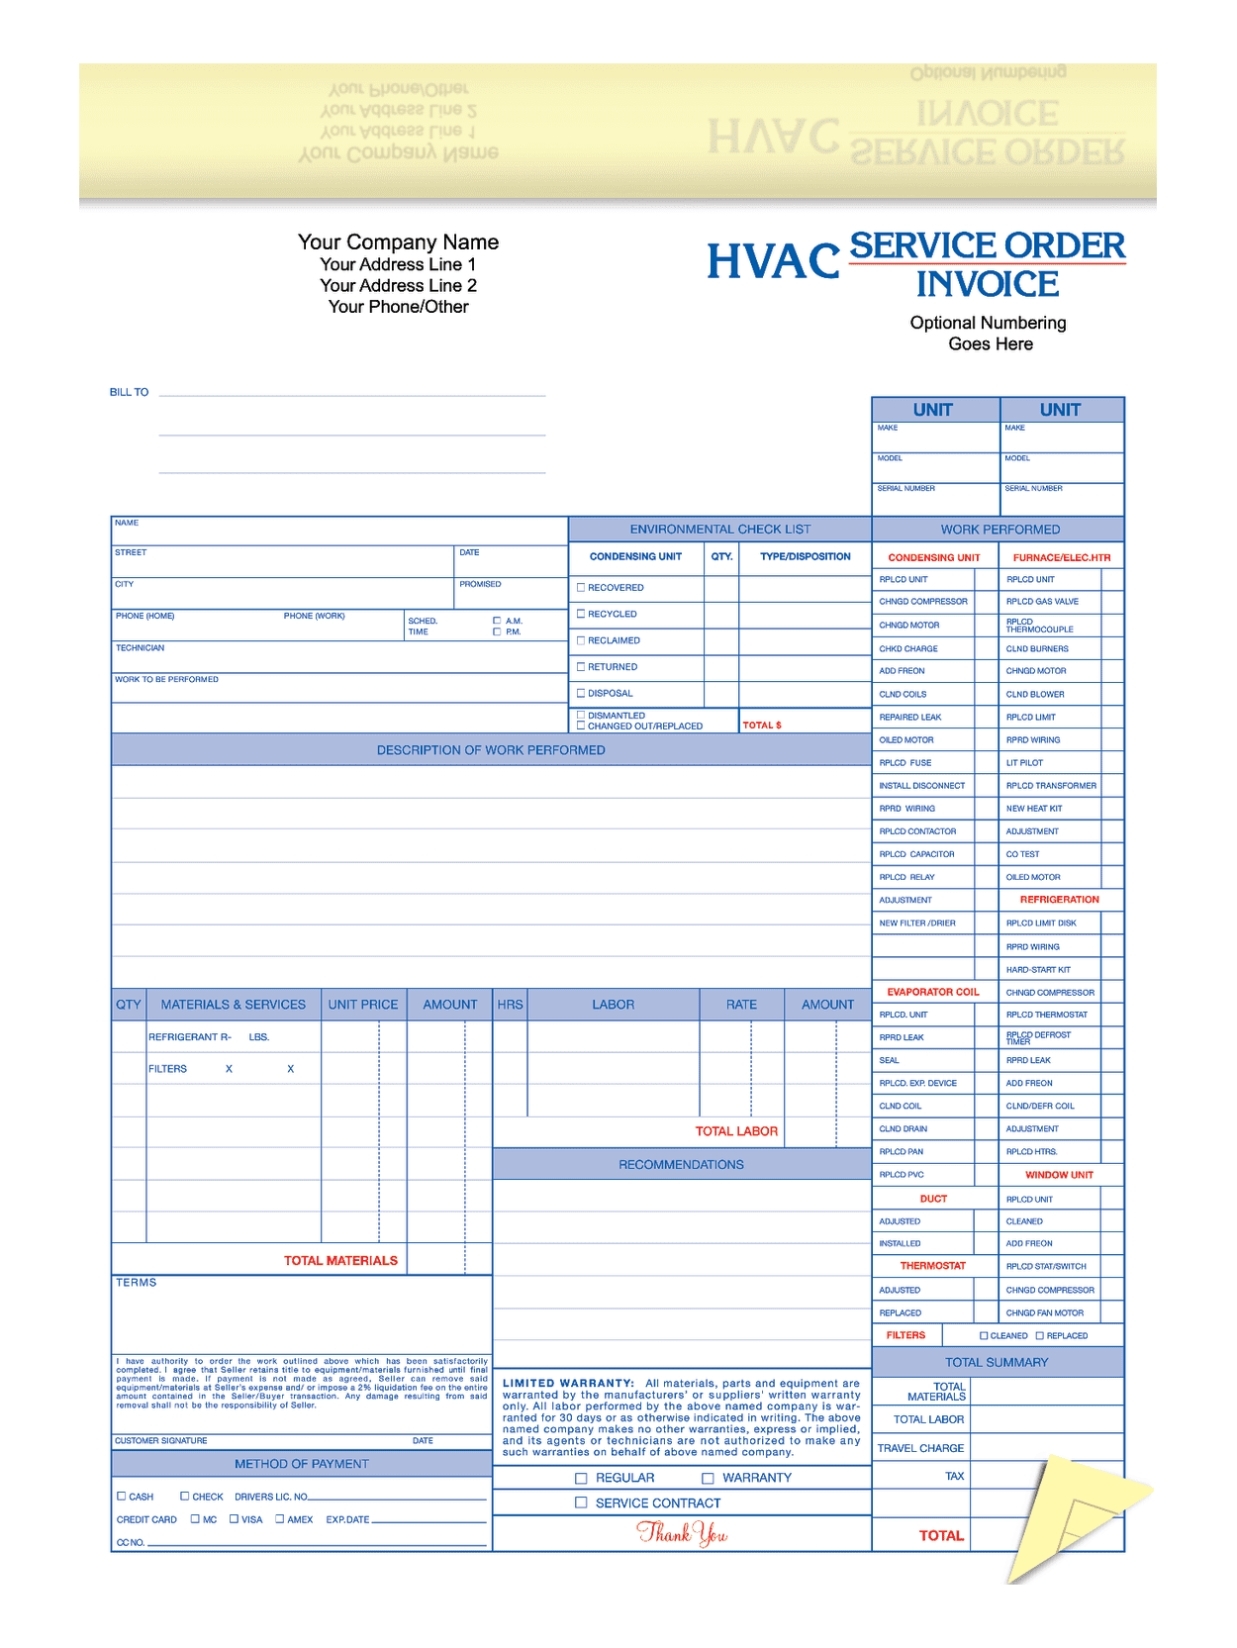 Hvac Service Order Forms - Invoice Template Pertaining To Hvac Service Order Invoice Template